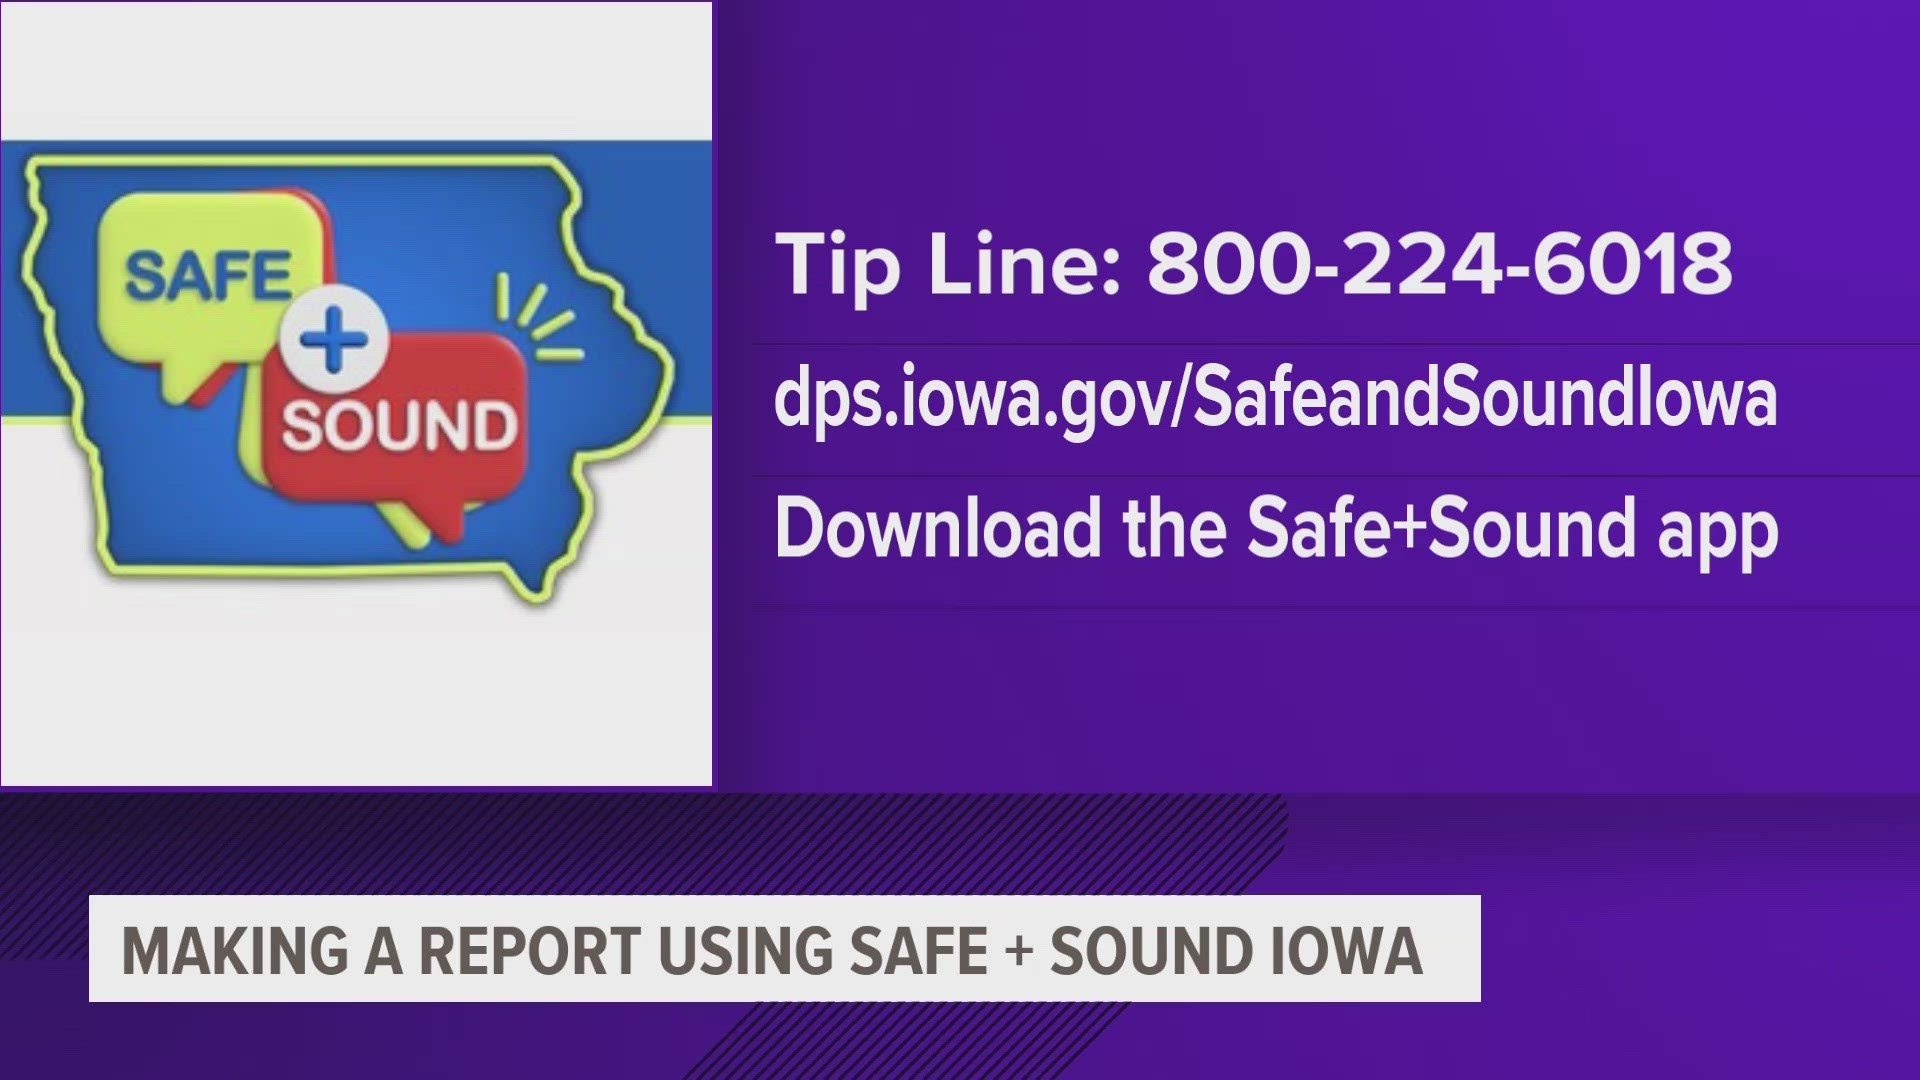 "Safe+Sound Iowa removes barriers with three easy ways to make a report," said Stephan Bayens, commissioner with the Iowa Department of Pubilc Safety.